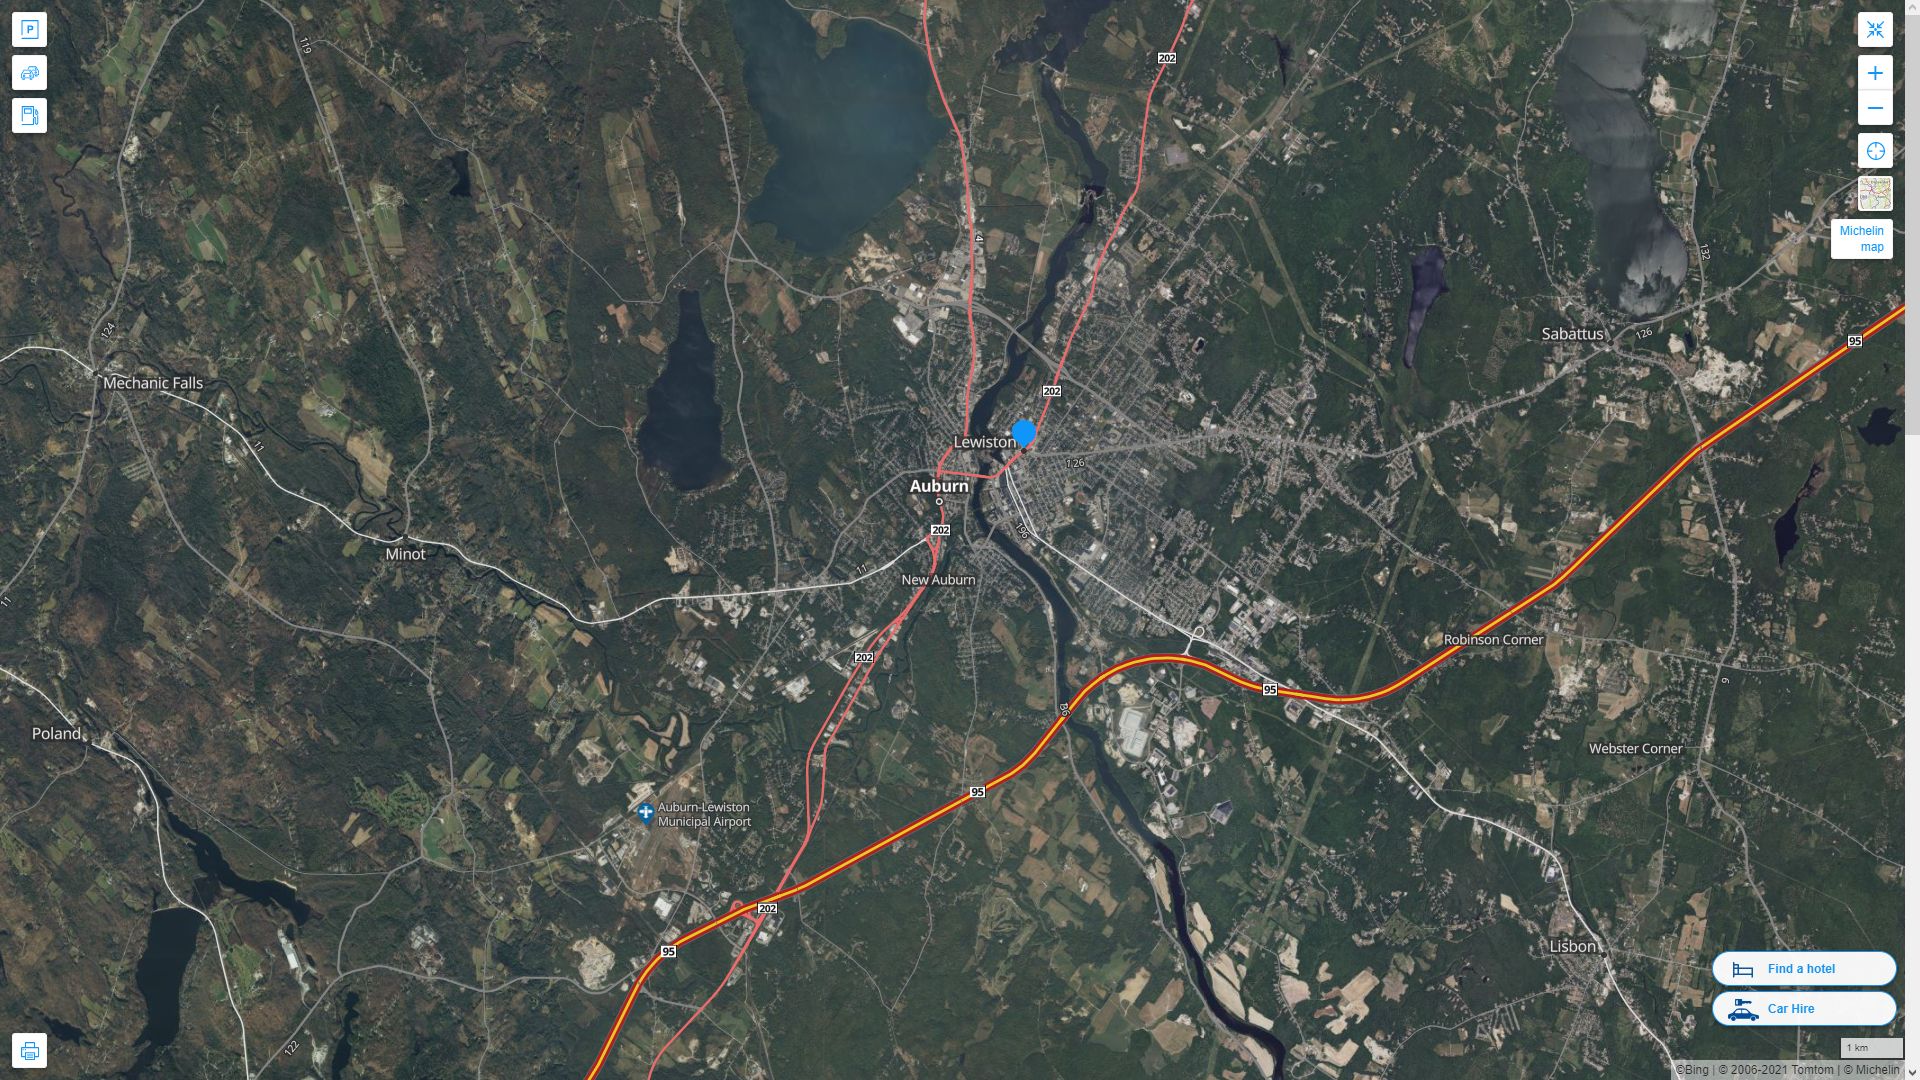 Lewiston Maine Highway and Road Map with Satellite View